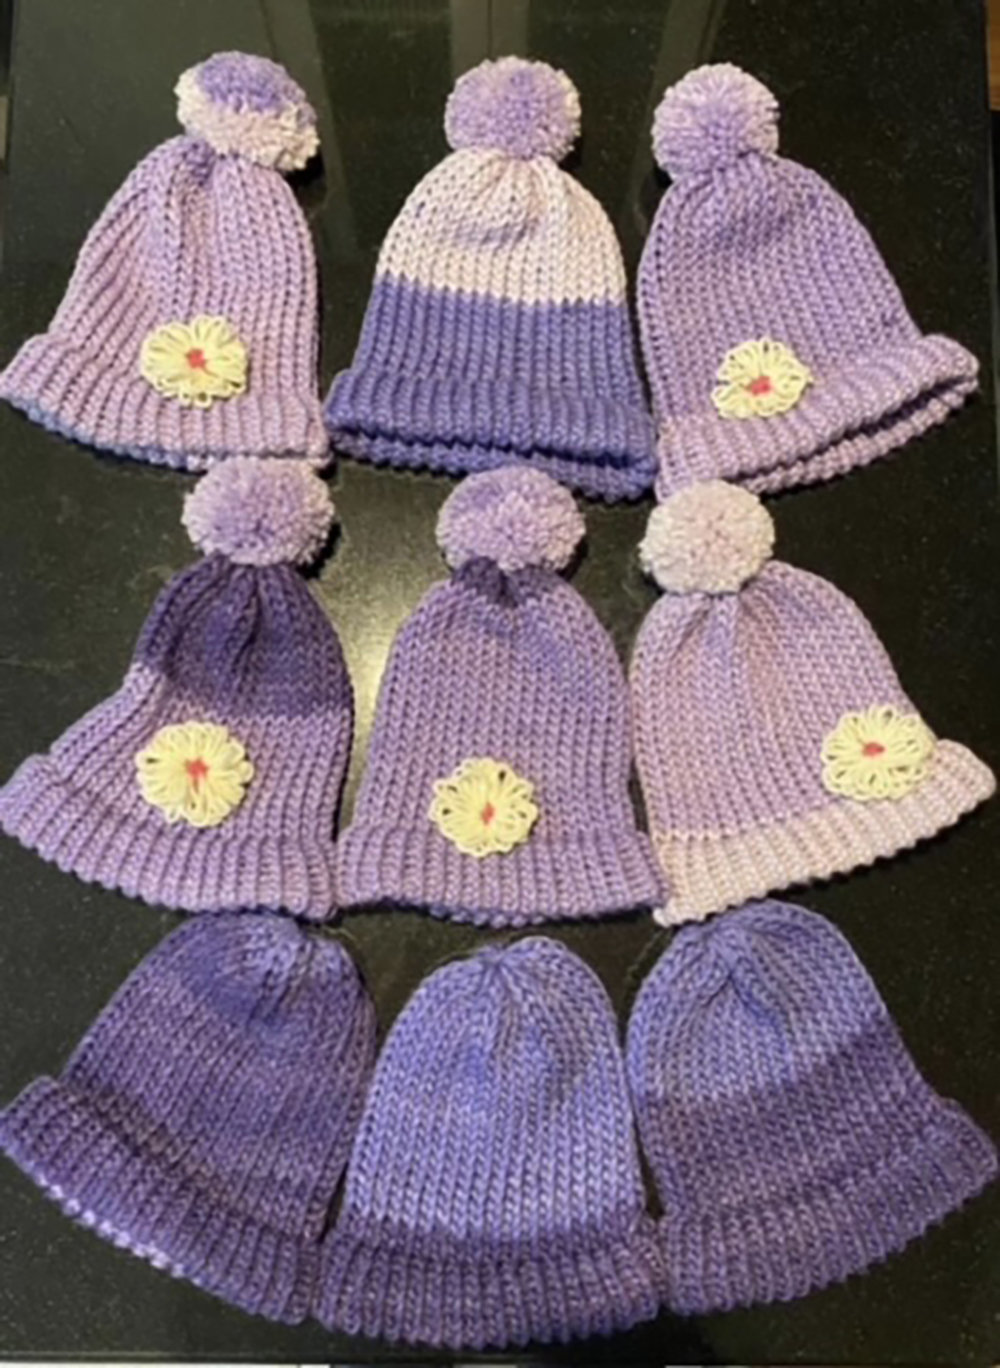 The purple hats were made and given to the Alzheimer’s Association for their annual Walk to End Alzheimer’s.